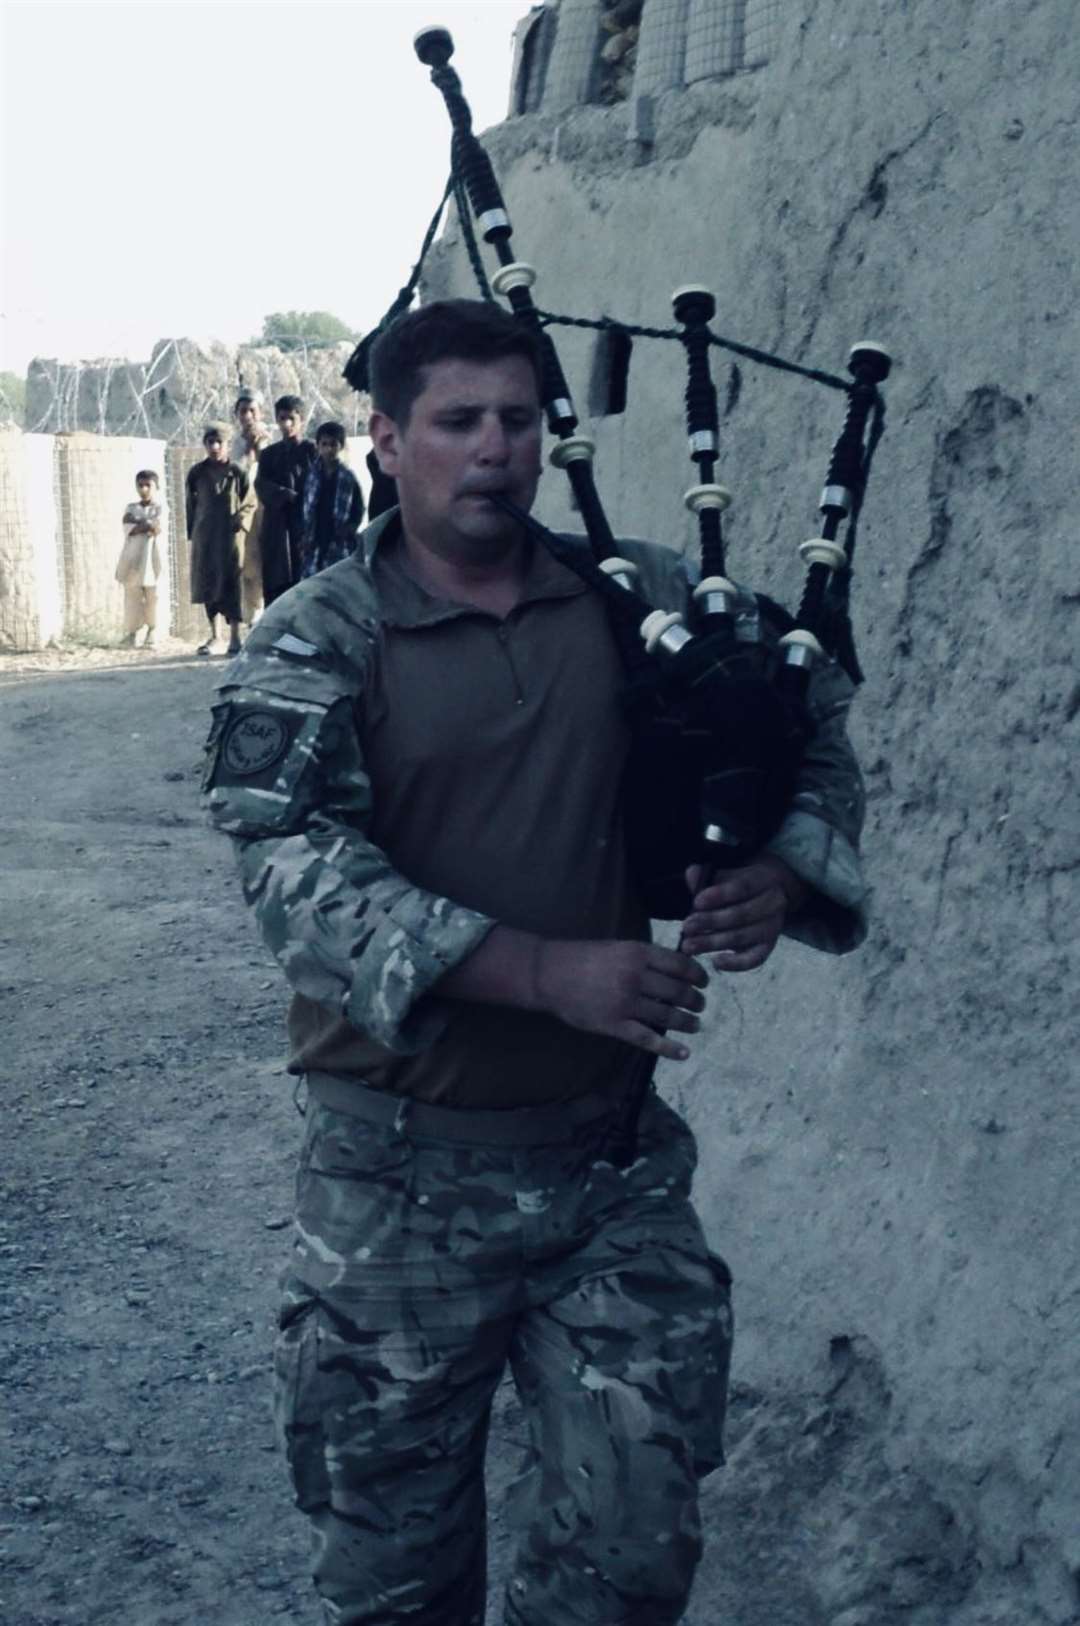 Jason served in the army where he fine-tuned his talents as a piper.